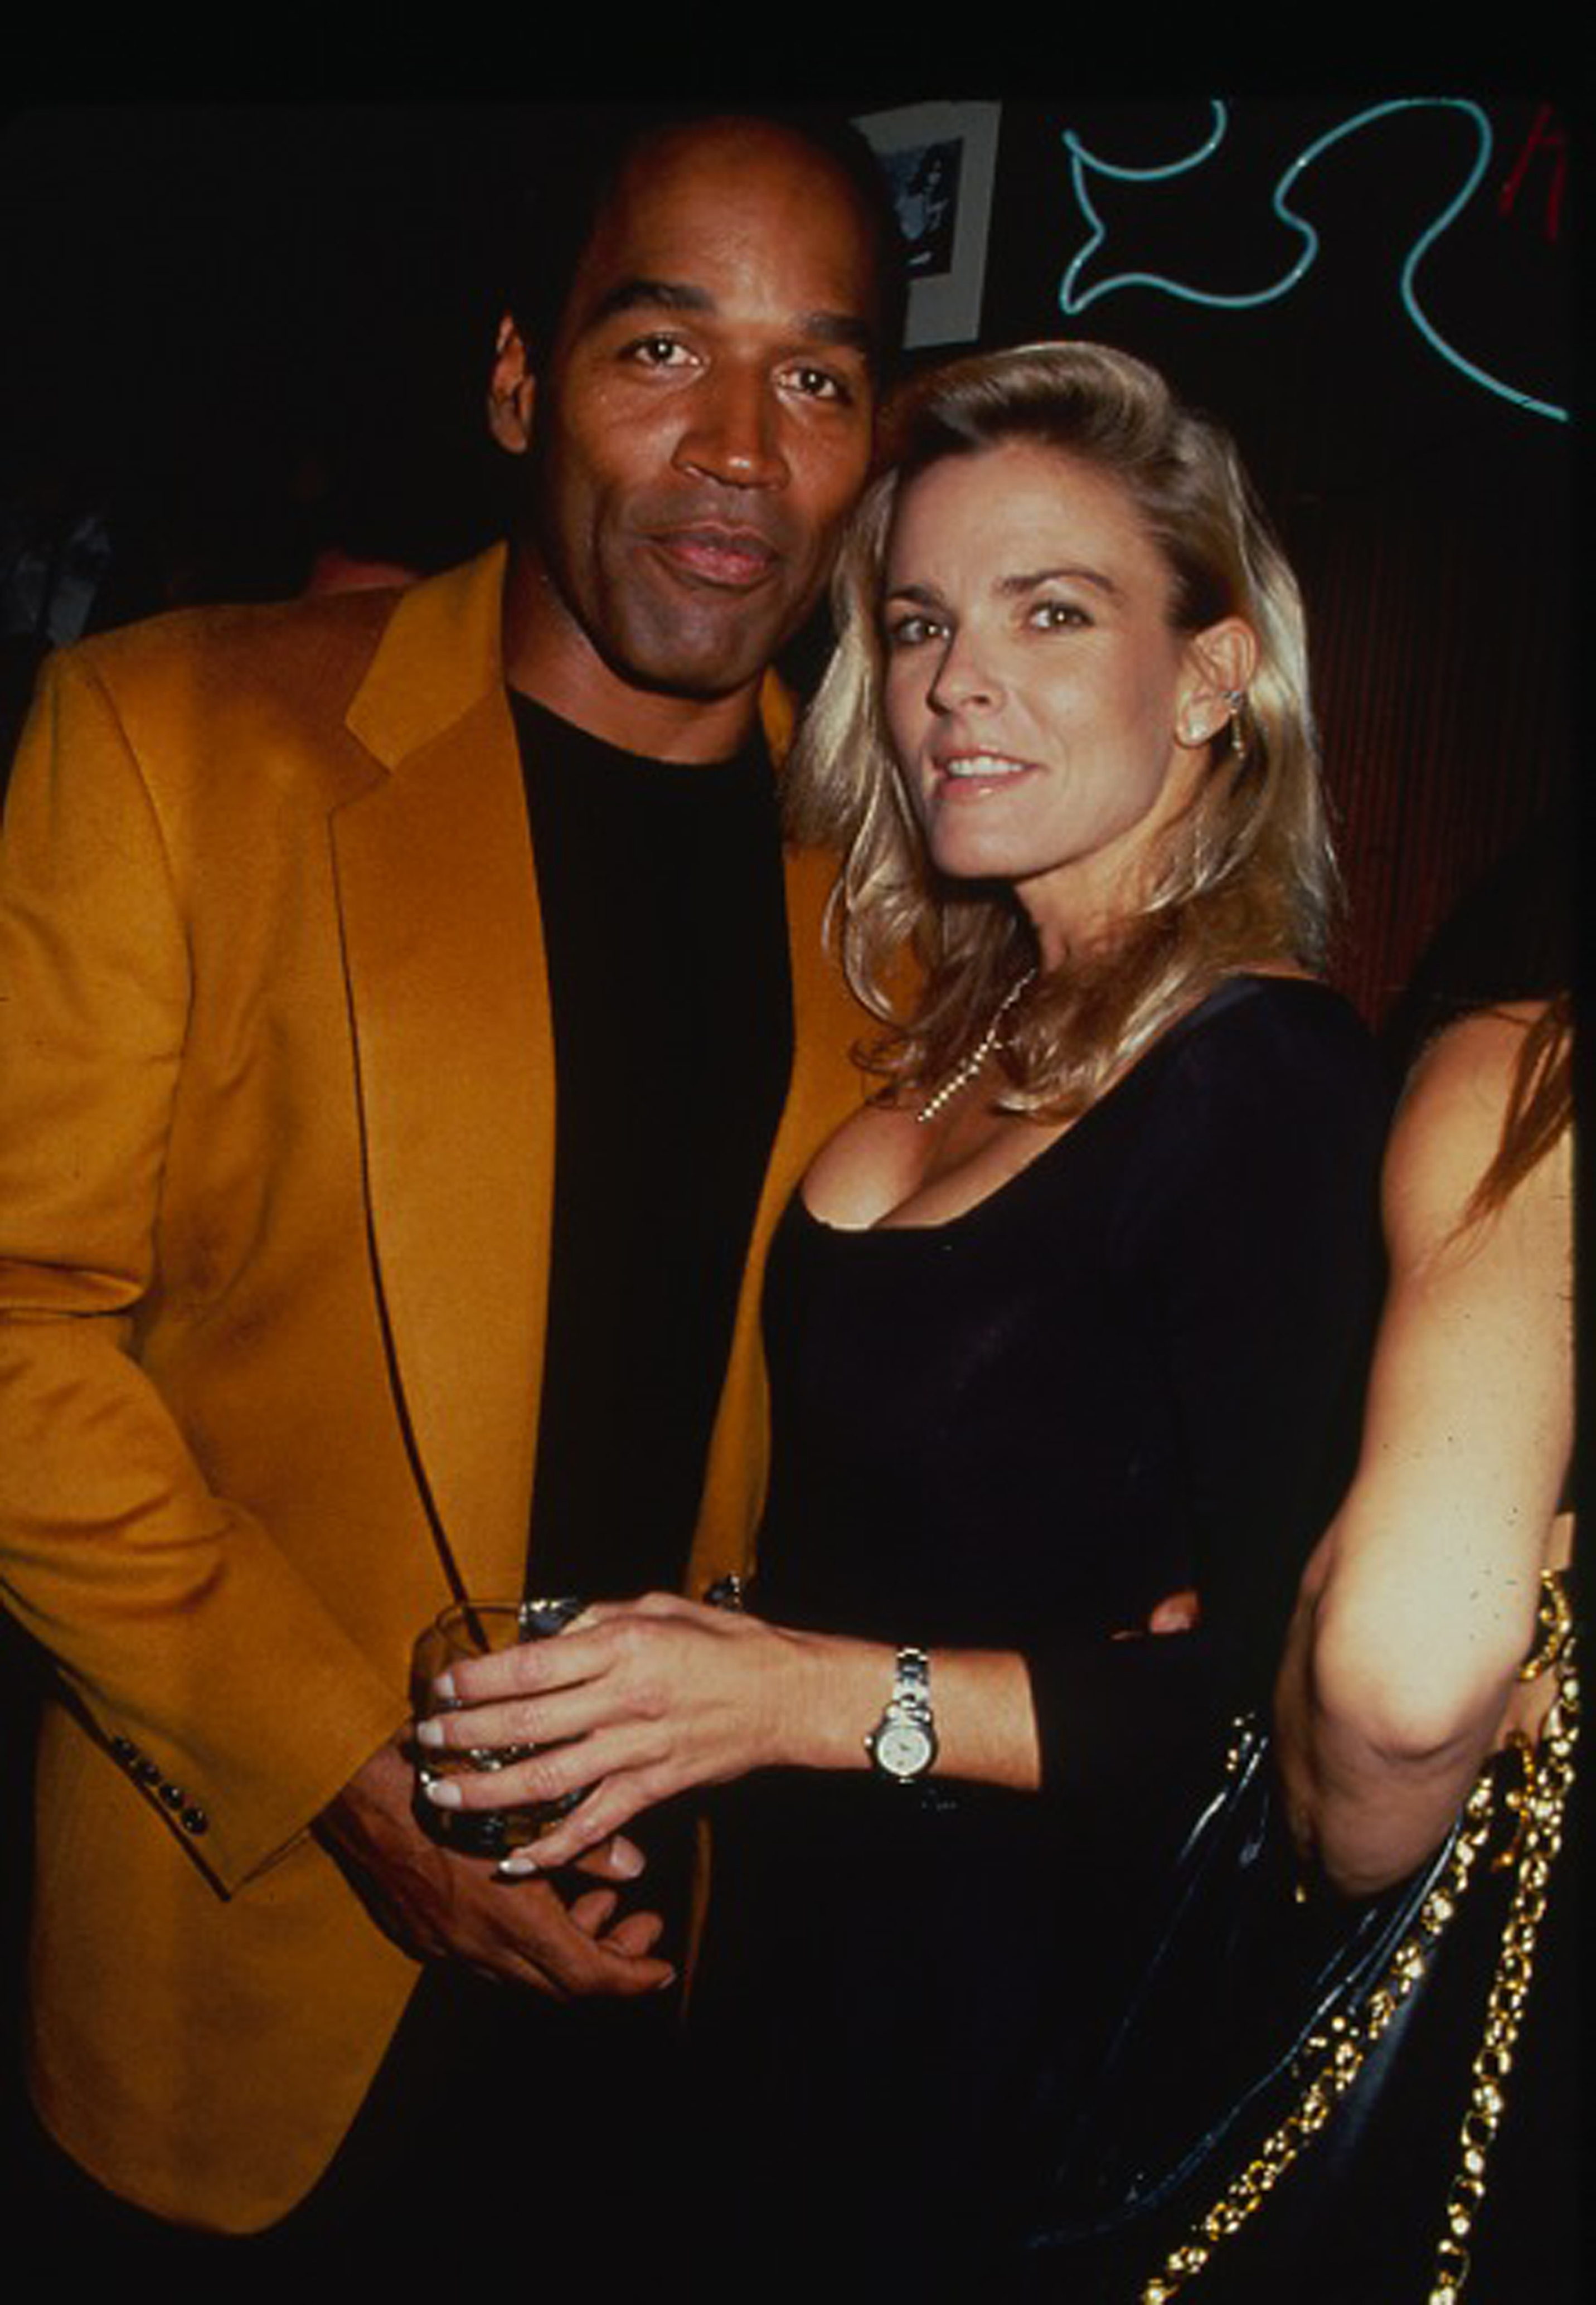 O.J. Simpson and Nicole Brown Simpson at a party at the Harley Davidson Cafe in 1993 in New York. | Source: Getty Images